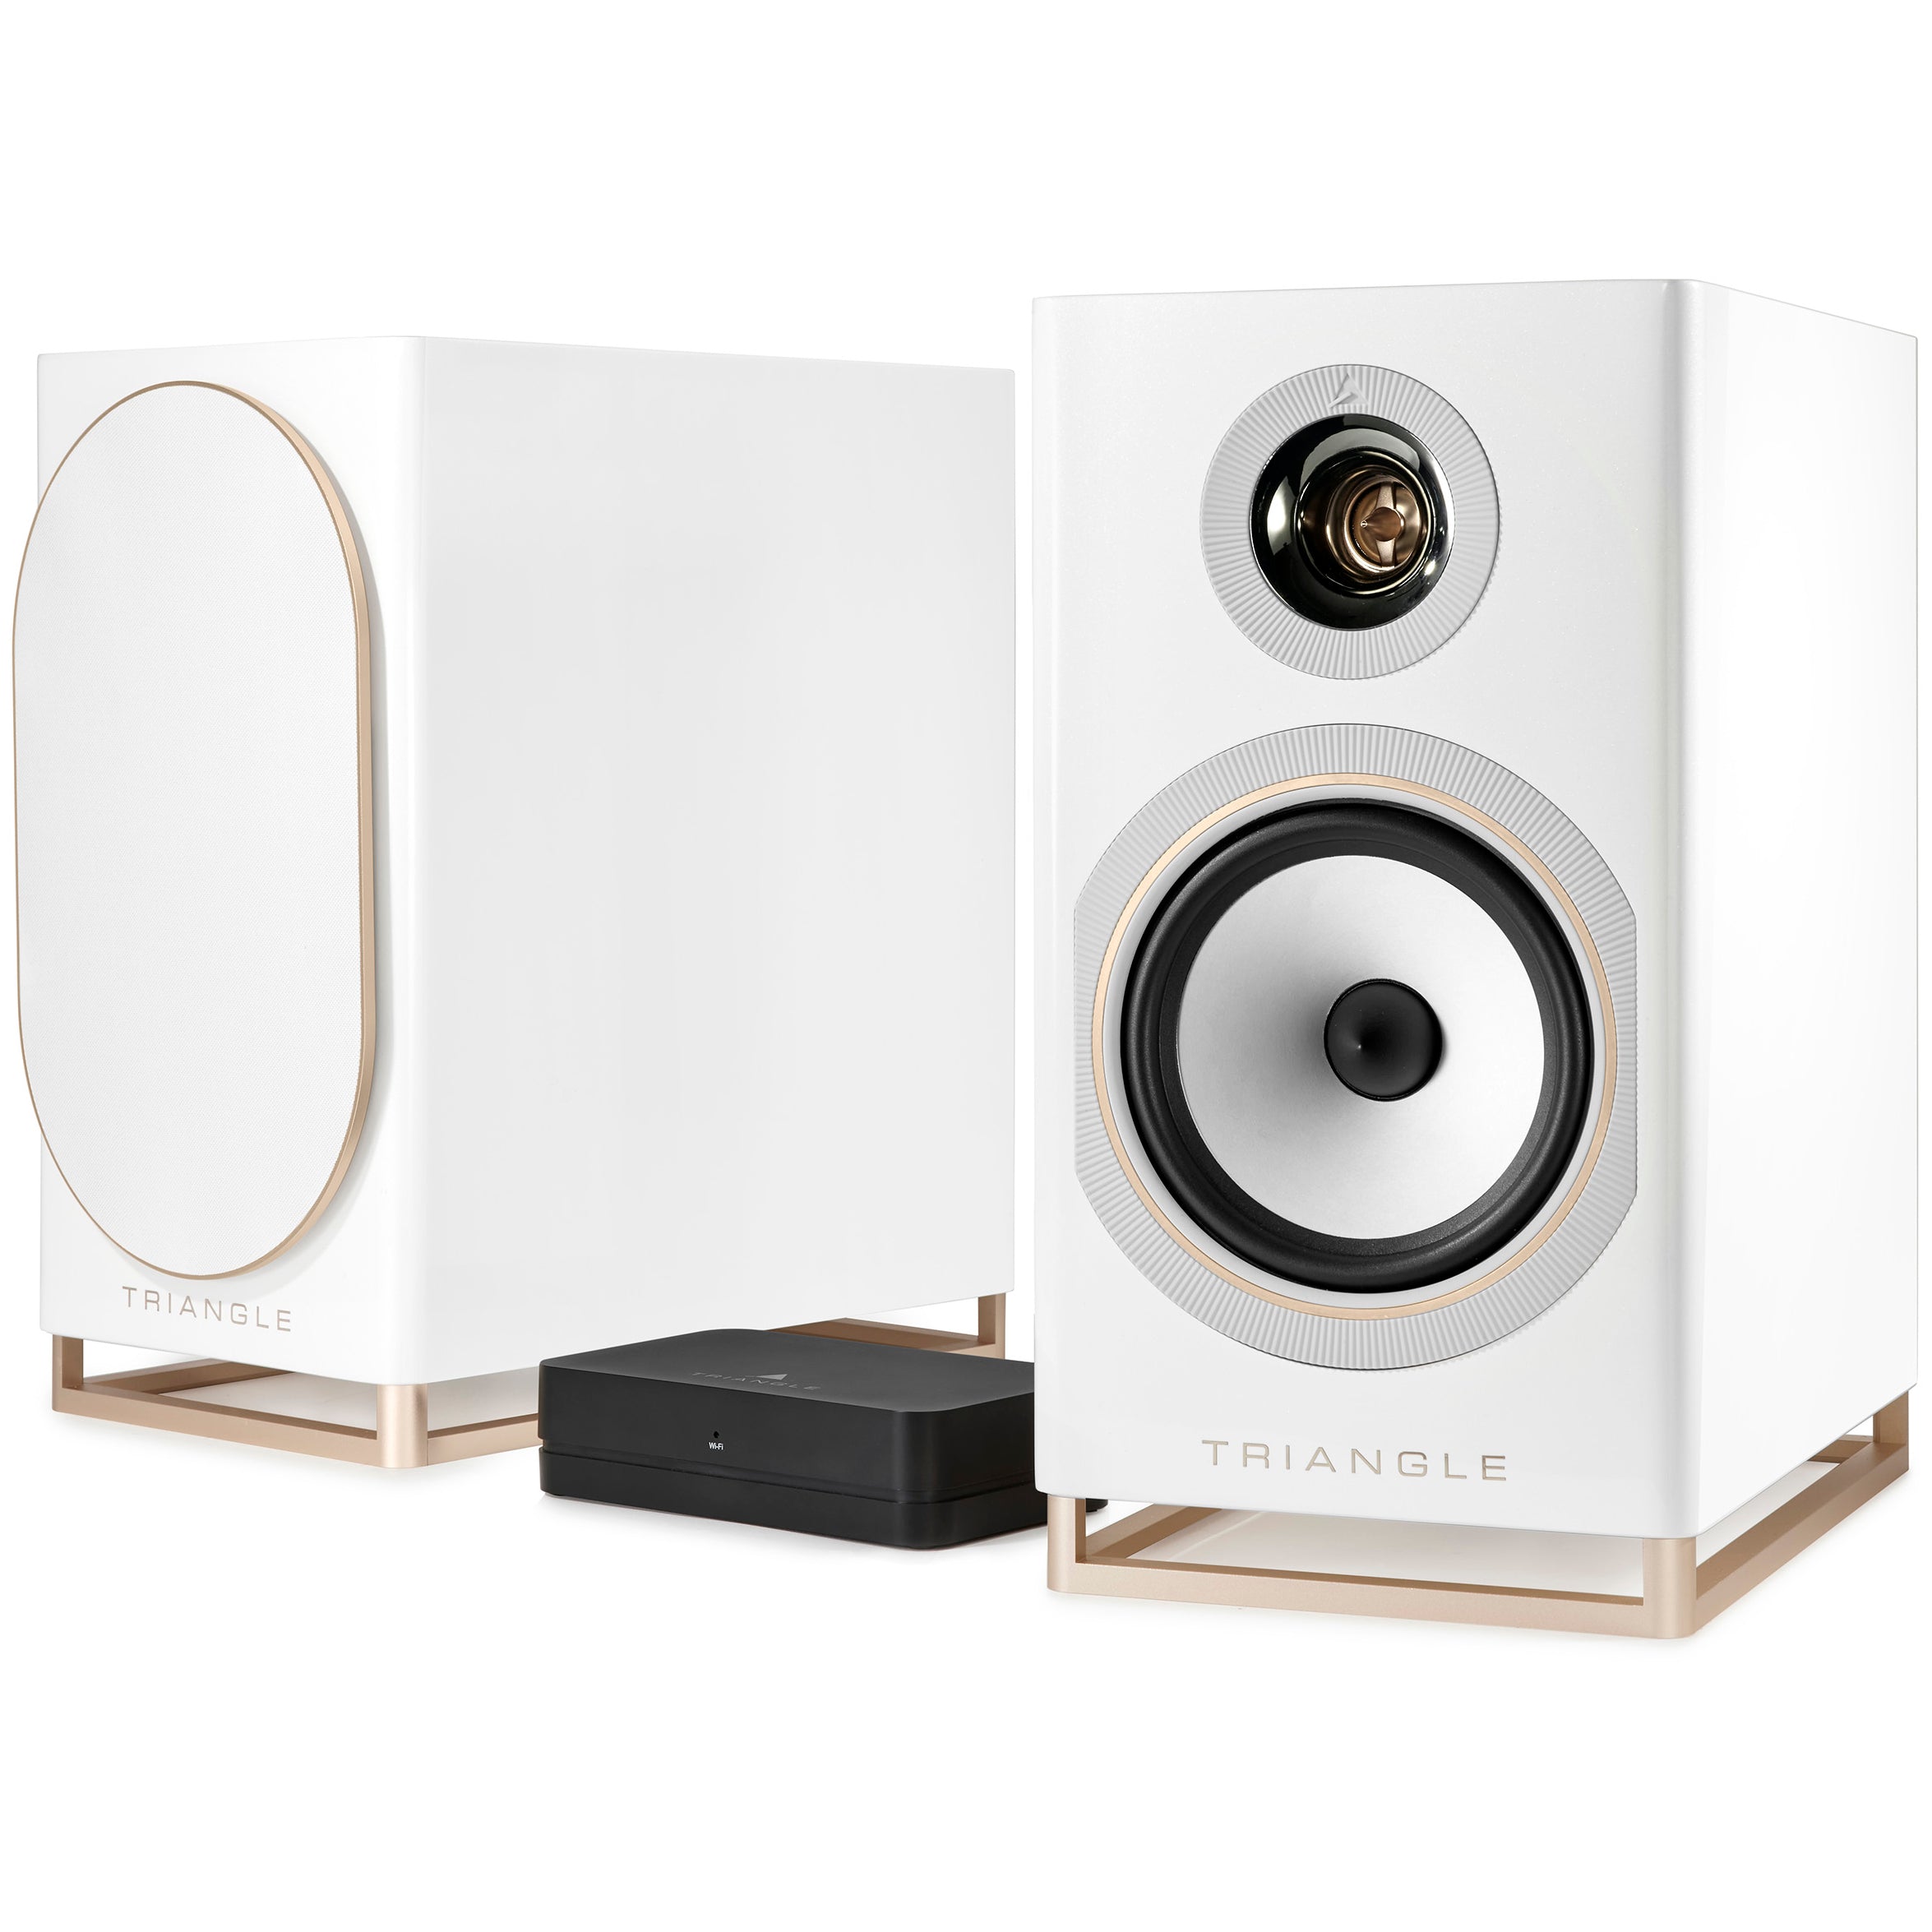 triangle-capella-enceinte-active-wifi-bluetooth-haut-de-gamme-stereo-hub-wisa-streaming-musique-pictures-packshot-blanc-sideral-space-white-1